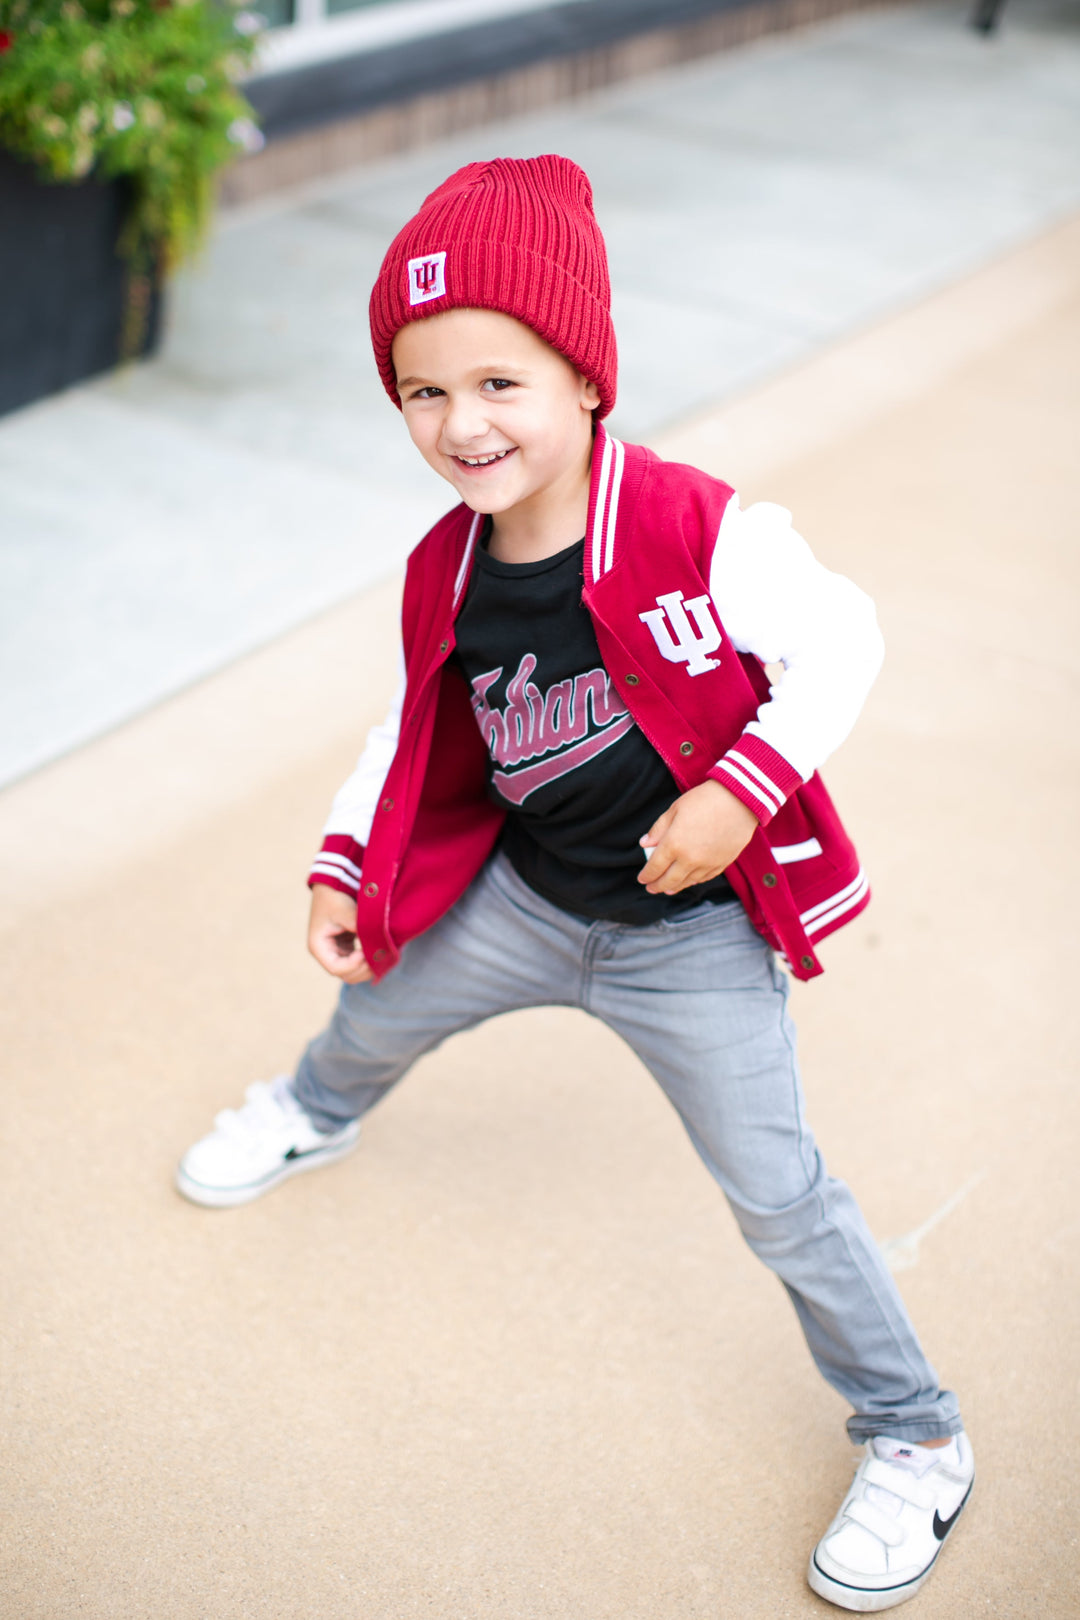 Authentic Brand - Indiana University Ribbed Knit Beanie in Crimson (Infant/Toddler/Youth)